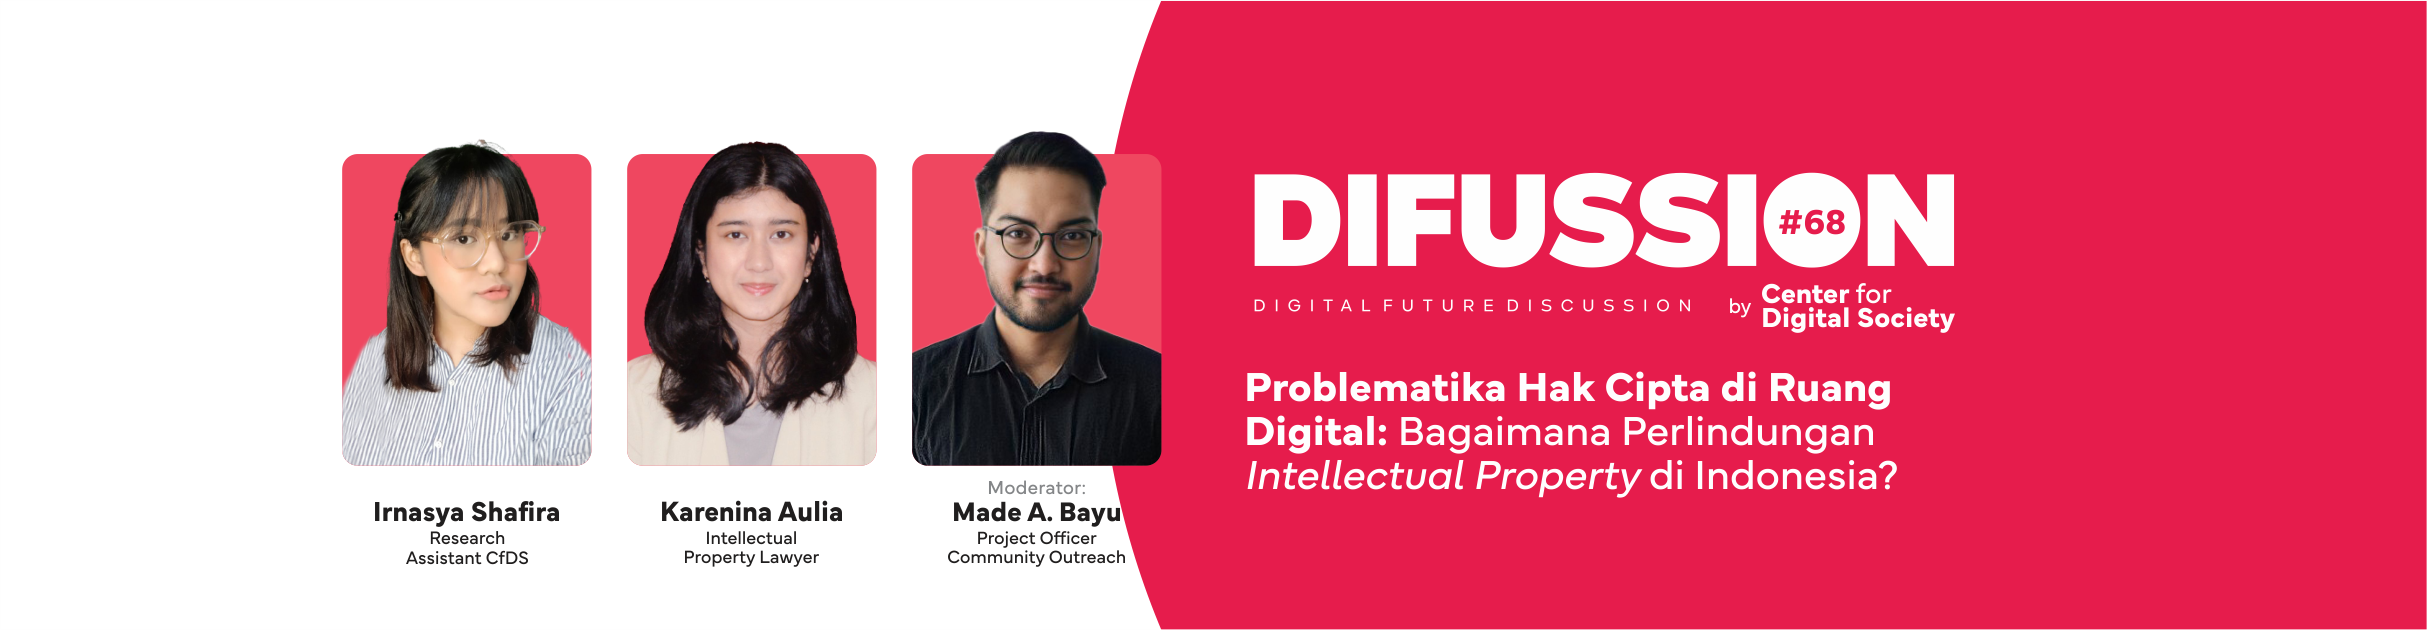 [PRESS RELEASE] The Problem of Intellectual Property Rights in Digital Space: How is the Indonesia Regulation for Protecting Intellectual Property? | #DIFUSSION70